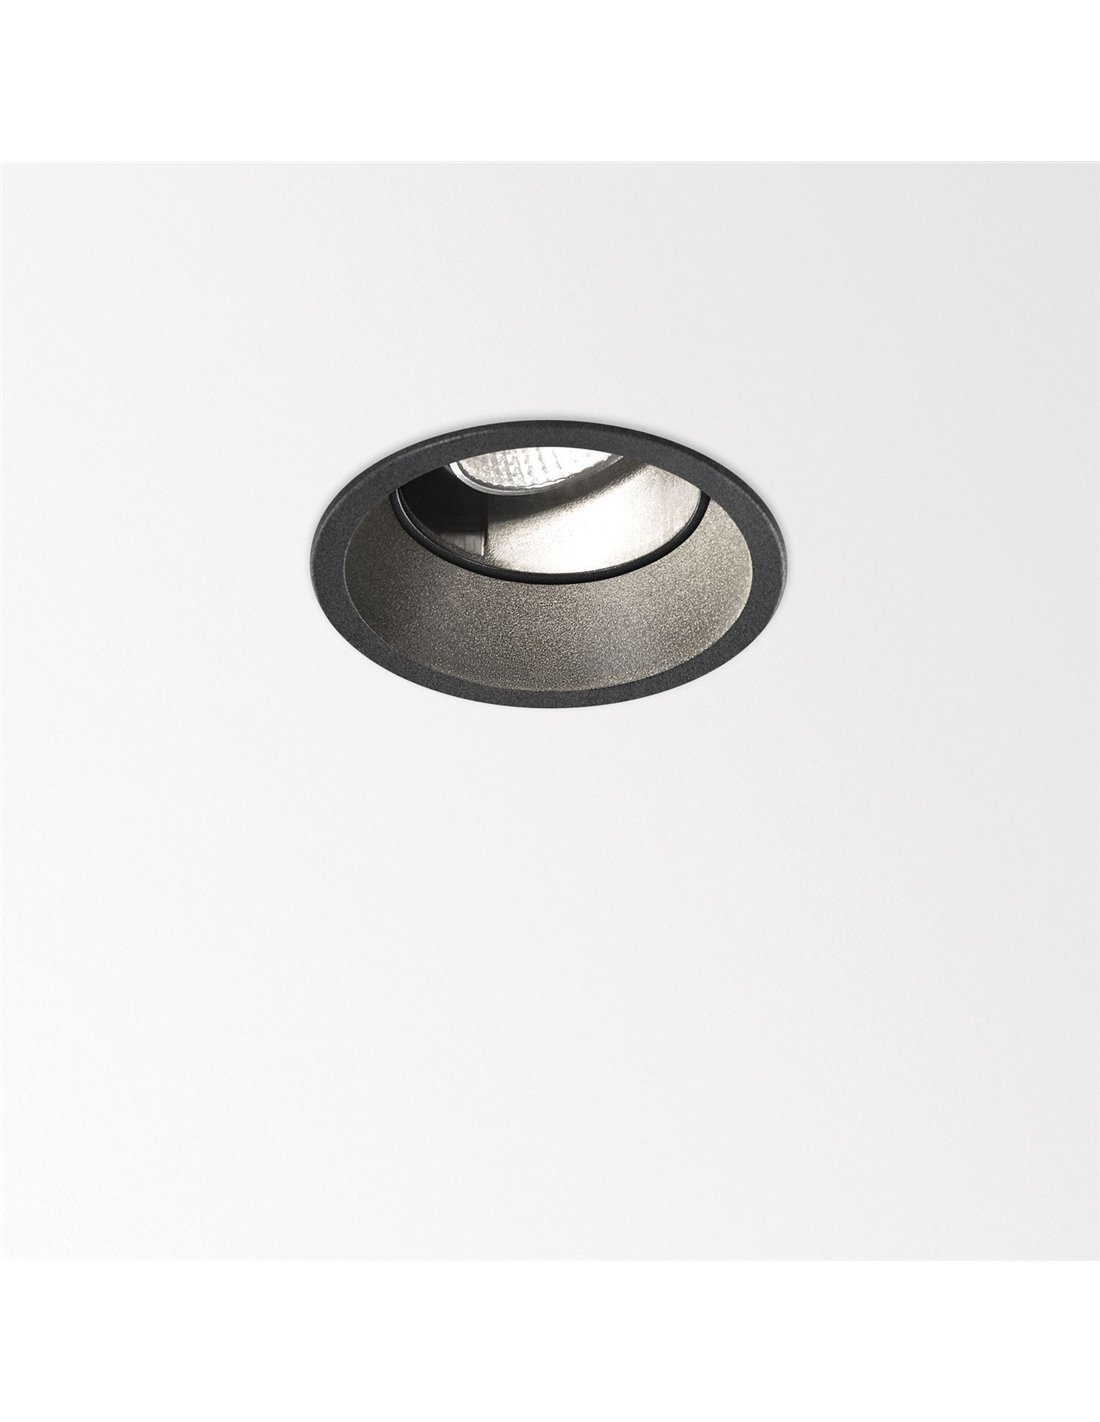 Spot LED encastrable TAIO ROUND IP65 1.0 